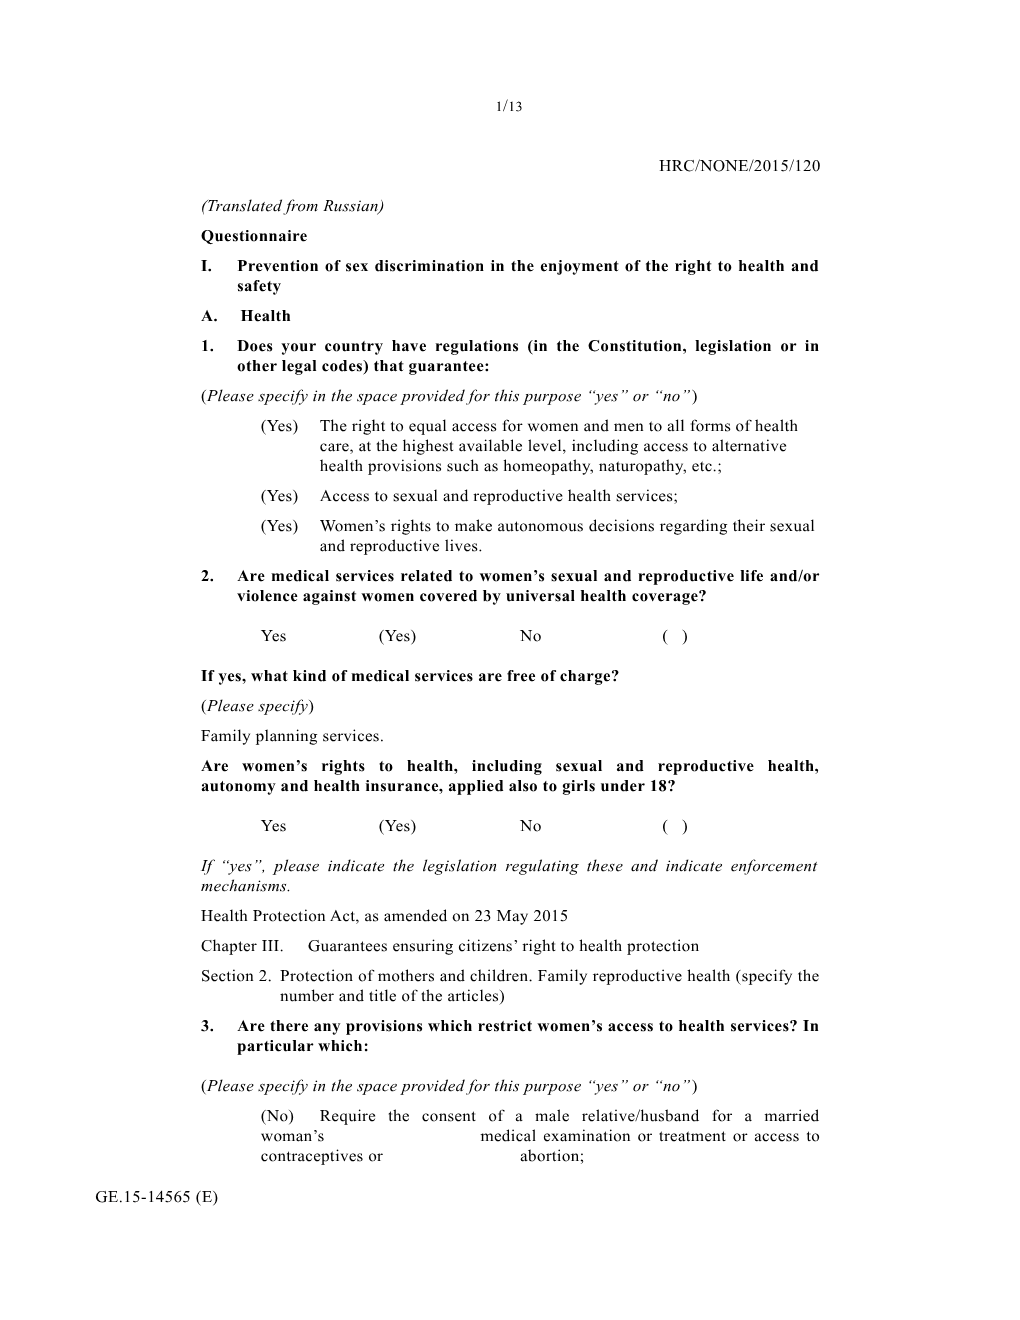 I.Prevention of Sex Discrimination in the Enjoyment of the Right to Health and Safety